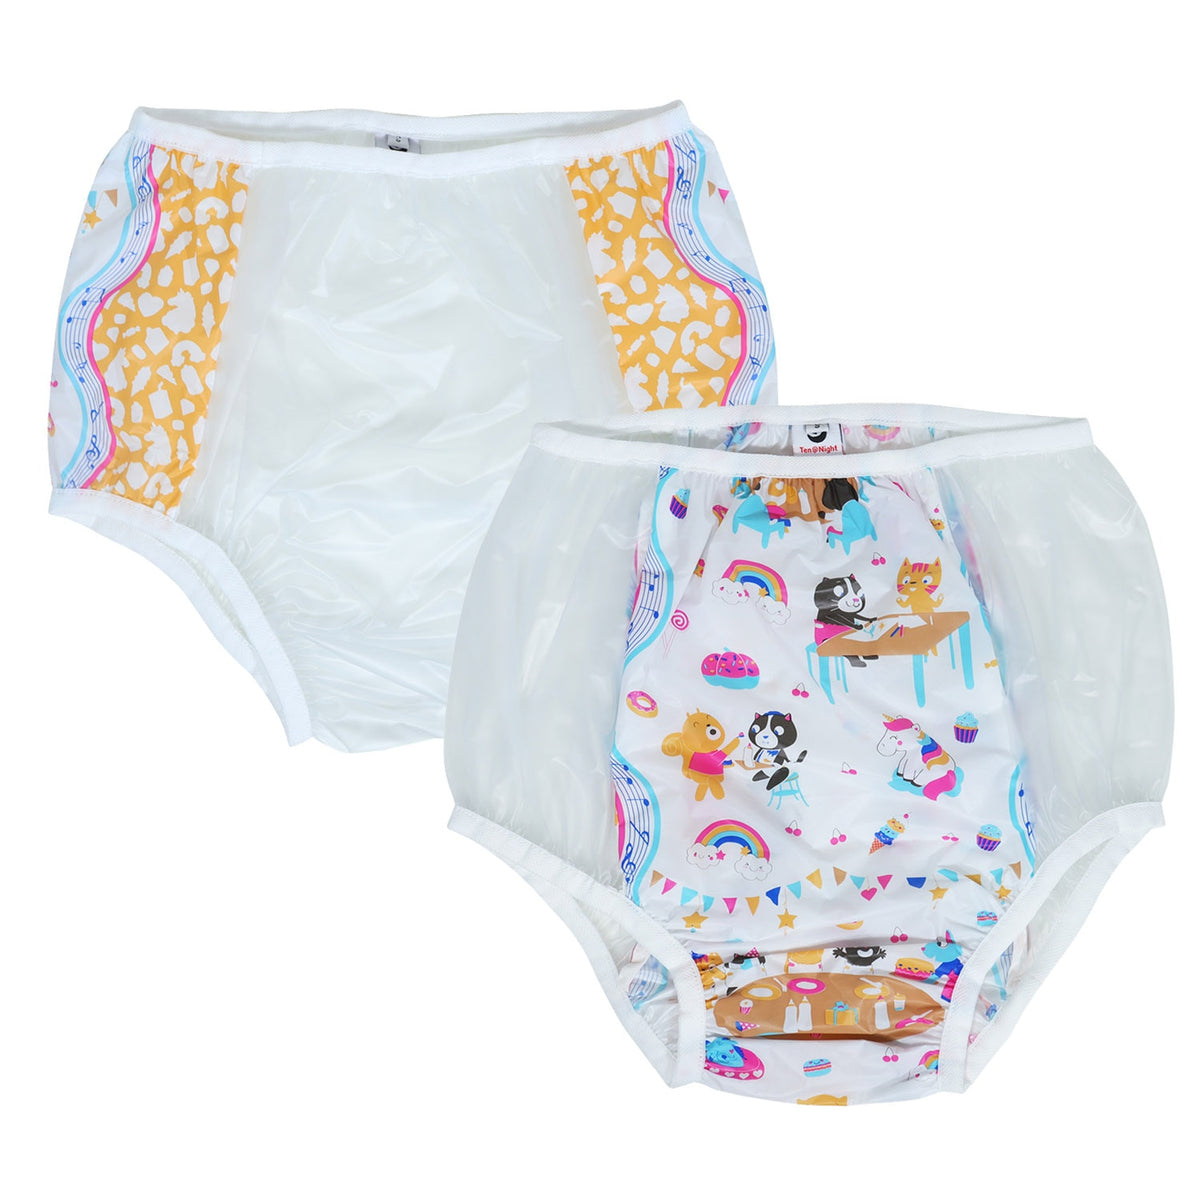 2 Dad-ables Reusable PVC Diapers - PVC Diapers - Twisted Jezebel